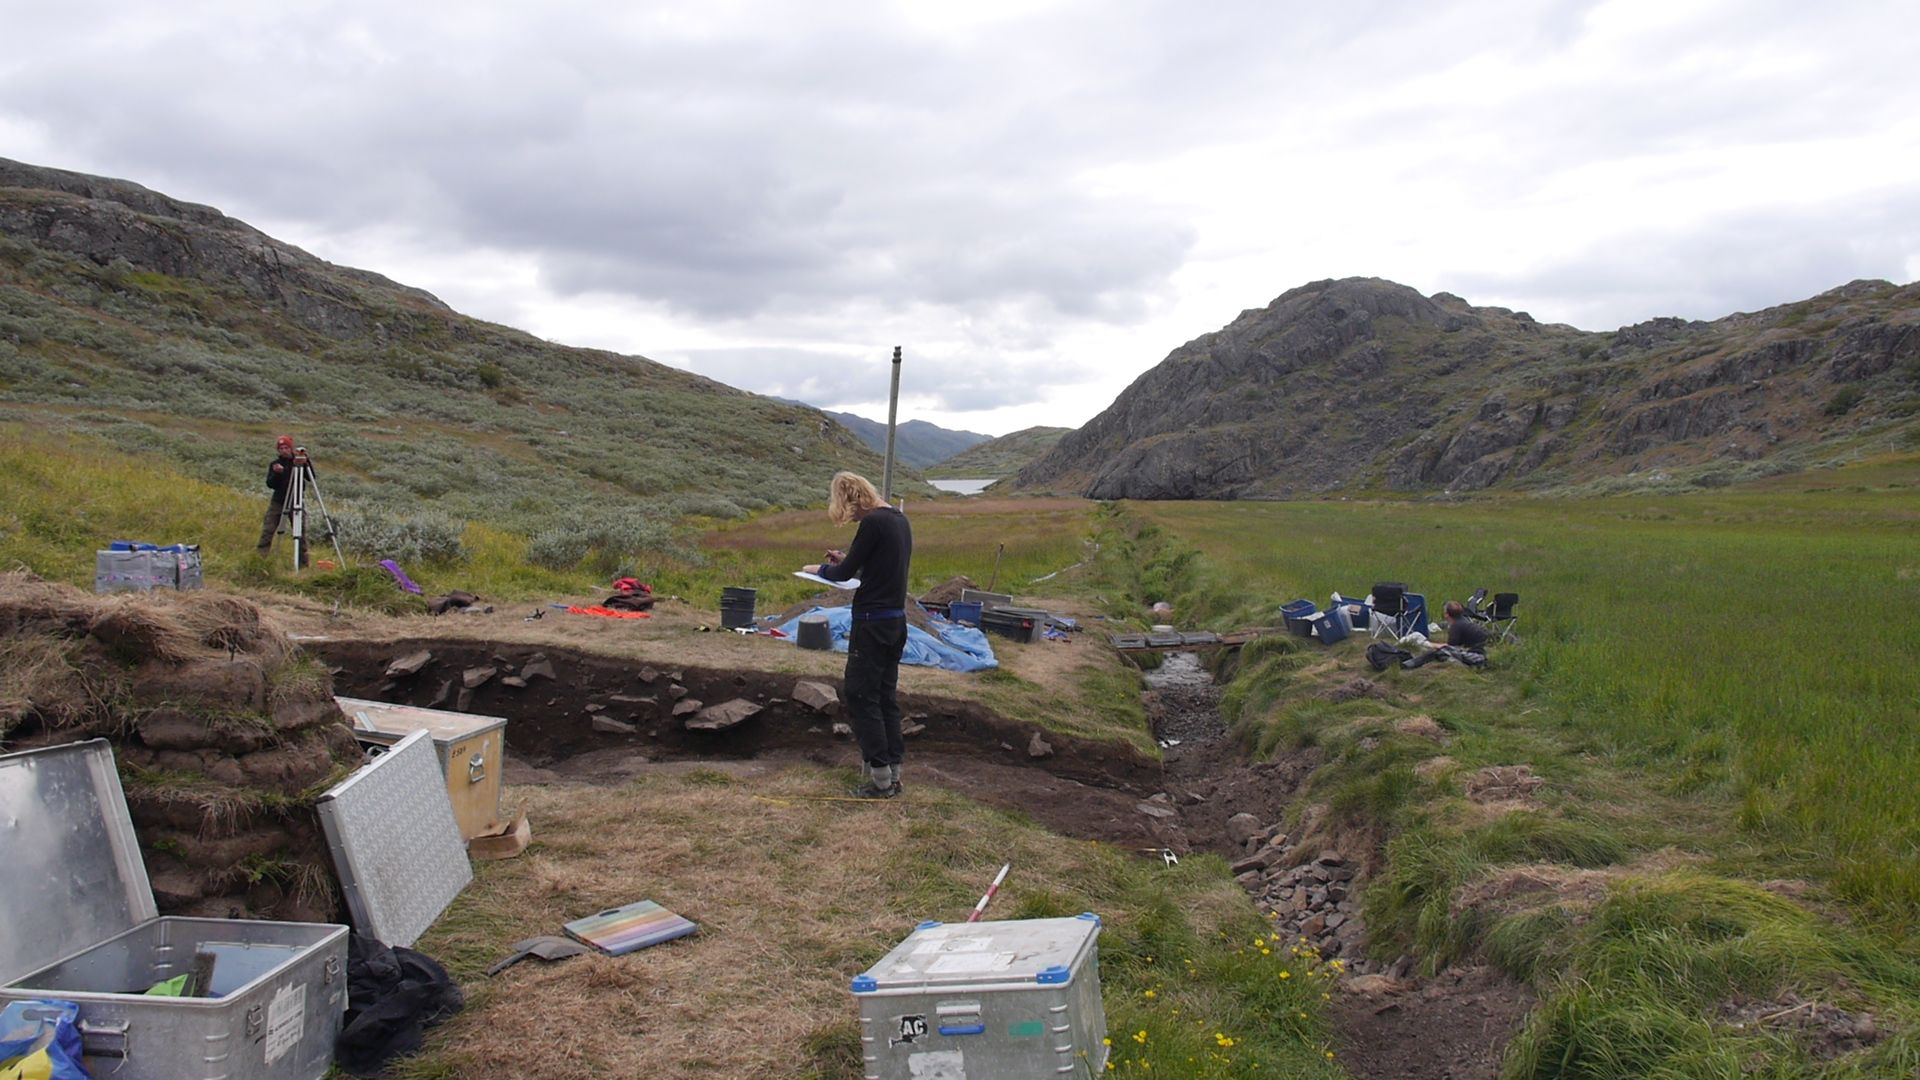 Archeologist Elie Pinta takes height measurements at an archeological dig in southern Greenland. The excavation, at a place, known today at Tasilikulooq, focuses on a site that once housed a small Norse dairy farm. Image by Eli Kintisch. Greenland, 2016.